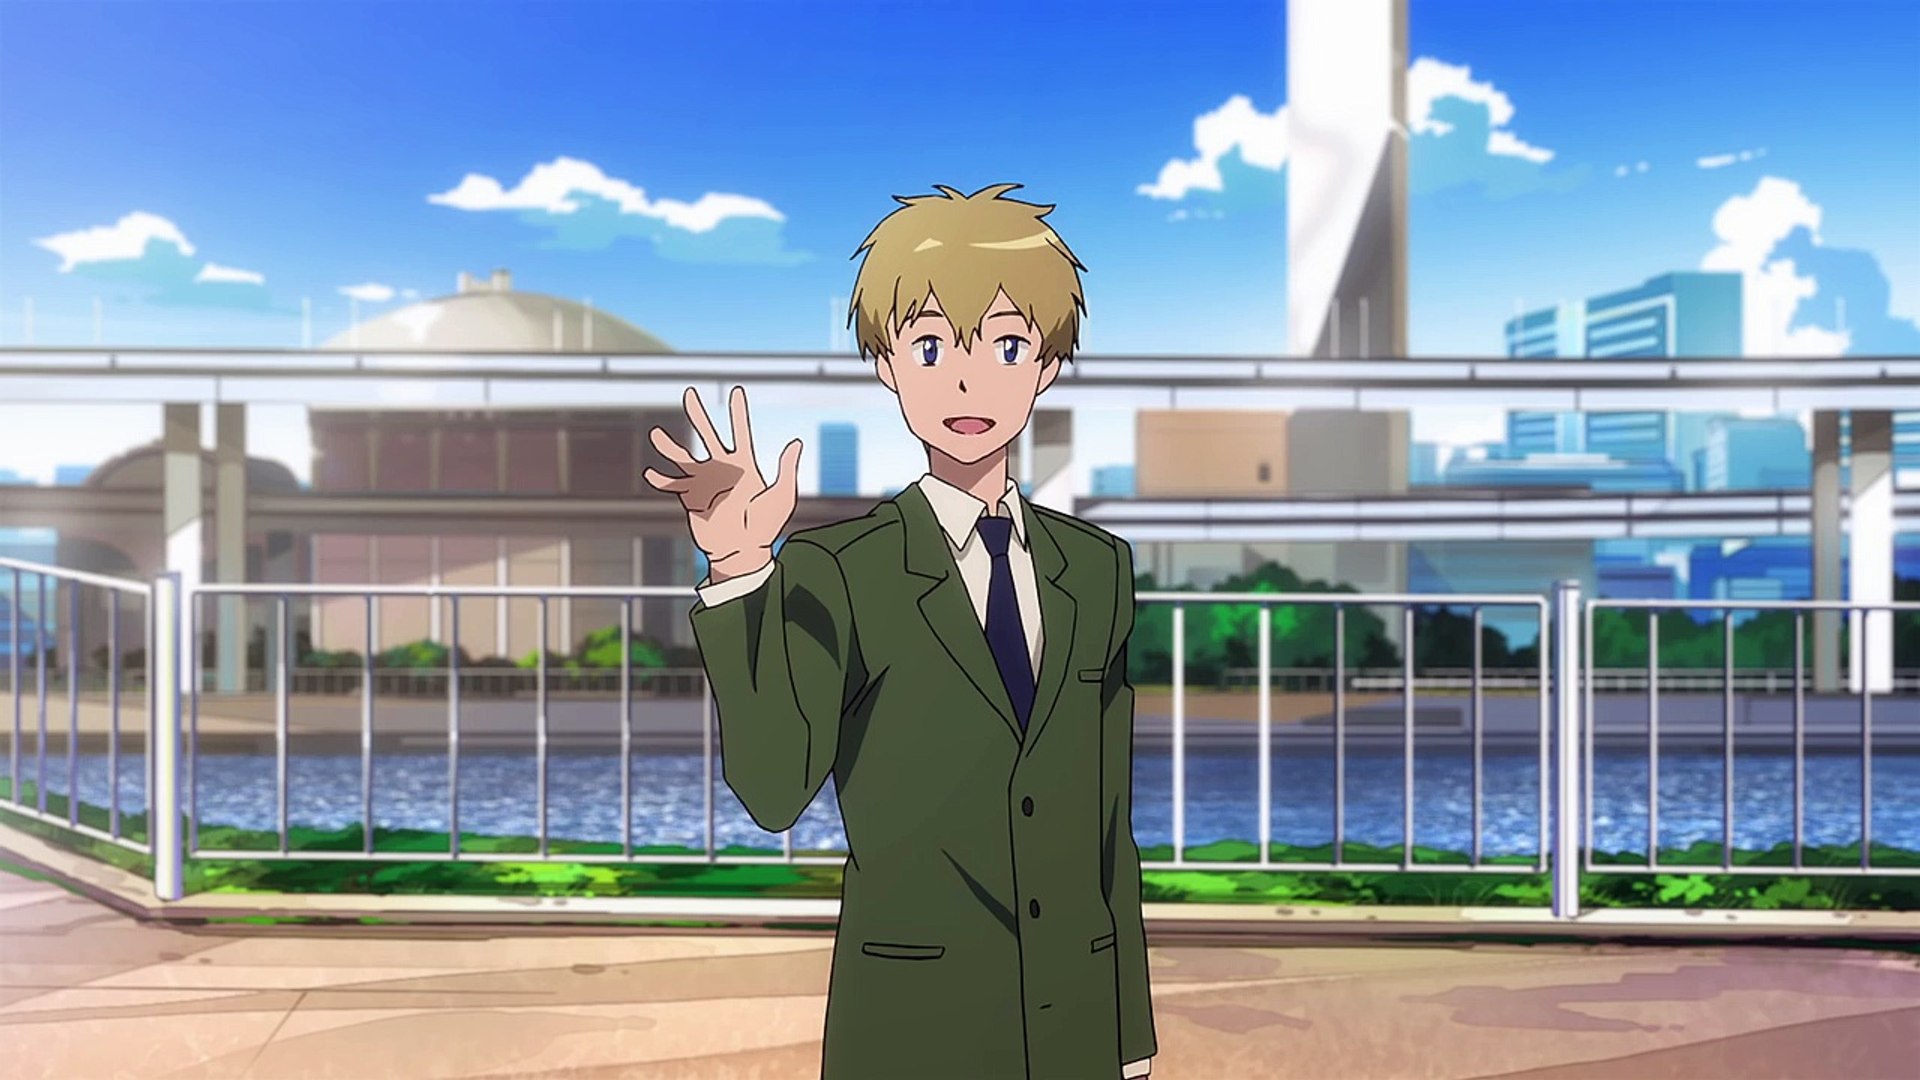 DIGIMON ADVENTURE tri. Chapter 1 Reunion [Normal Version], Video software